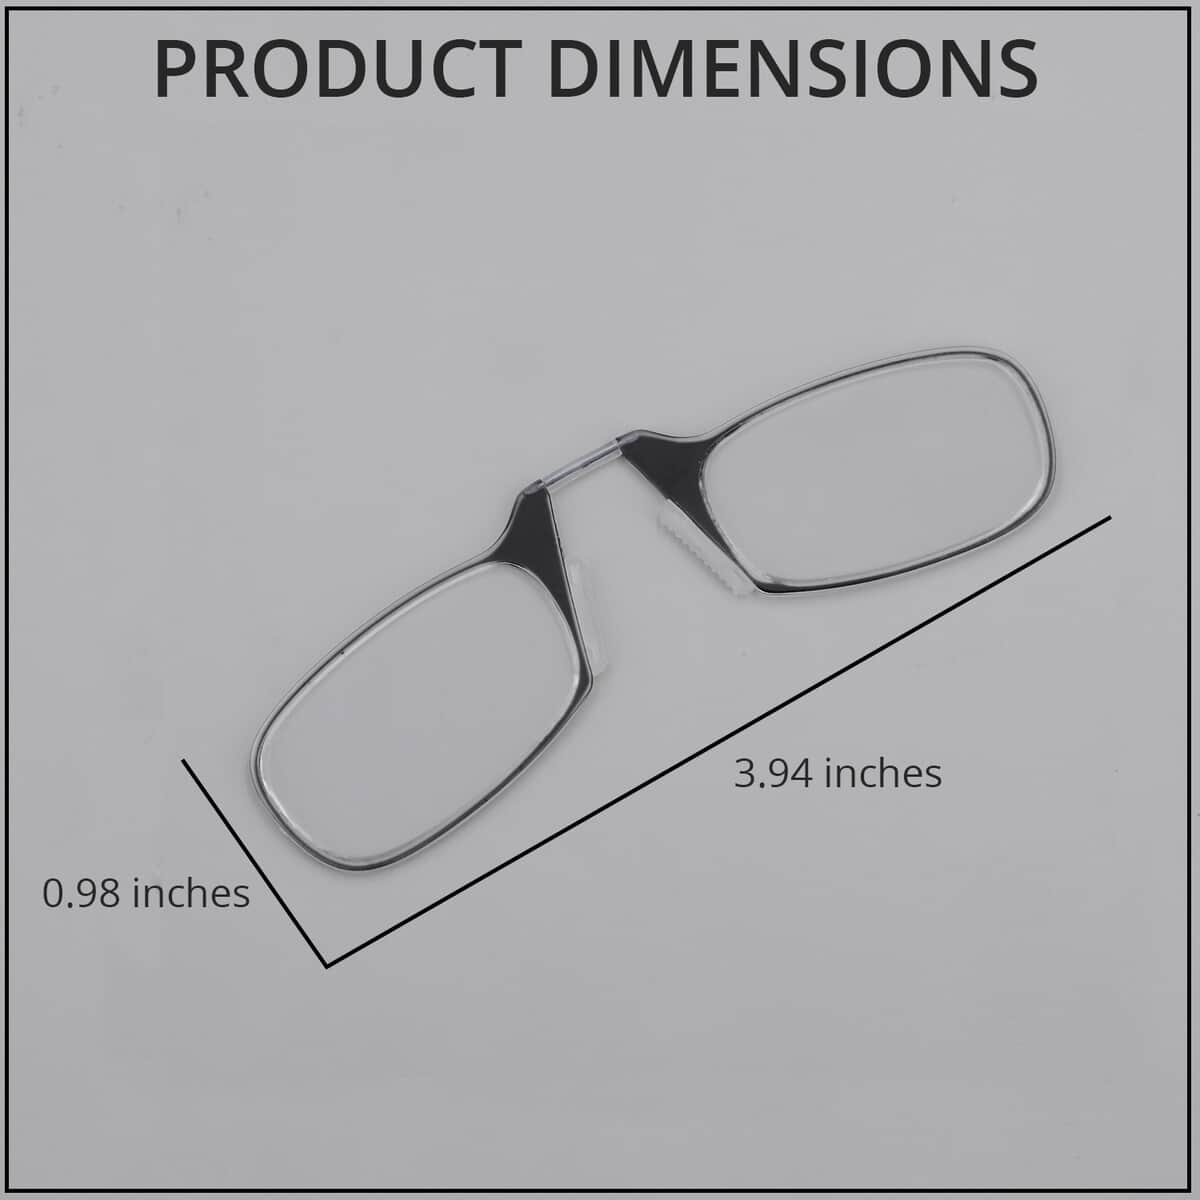 Feather Light Reading Glasses with a Flat Case - Black (Degree 1.0) image number 3